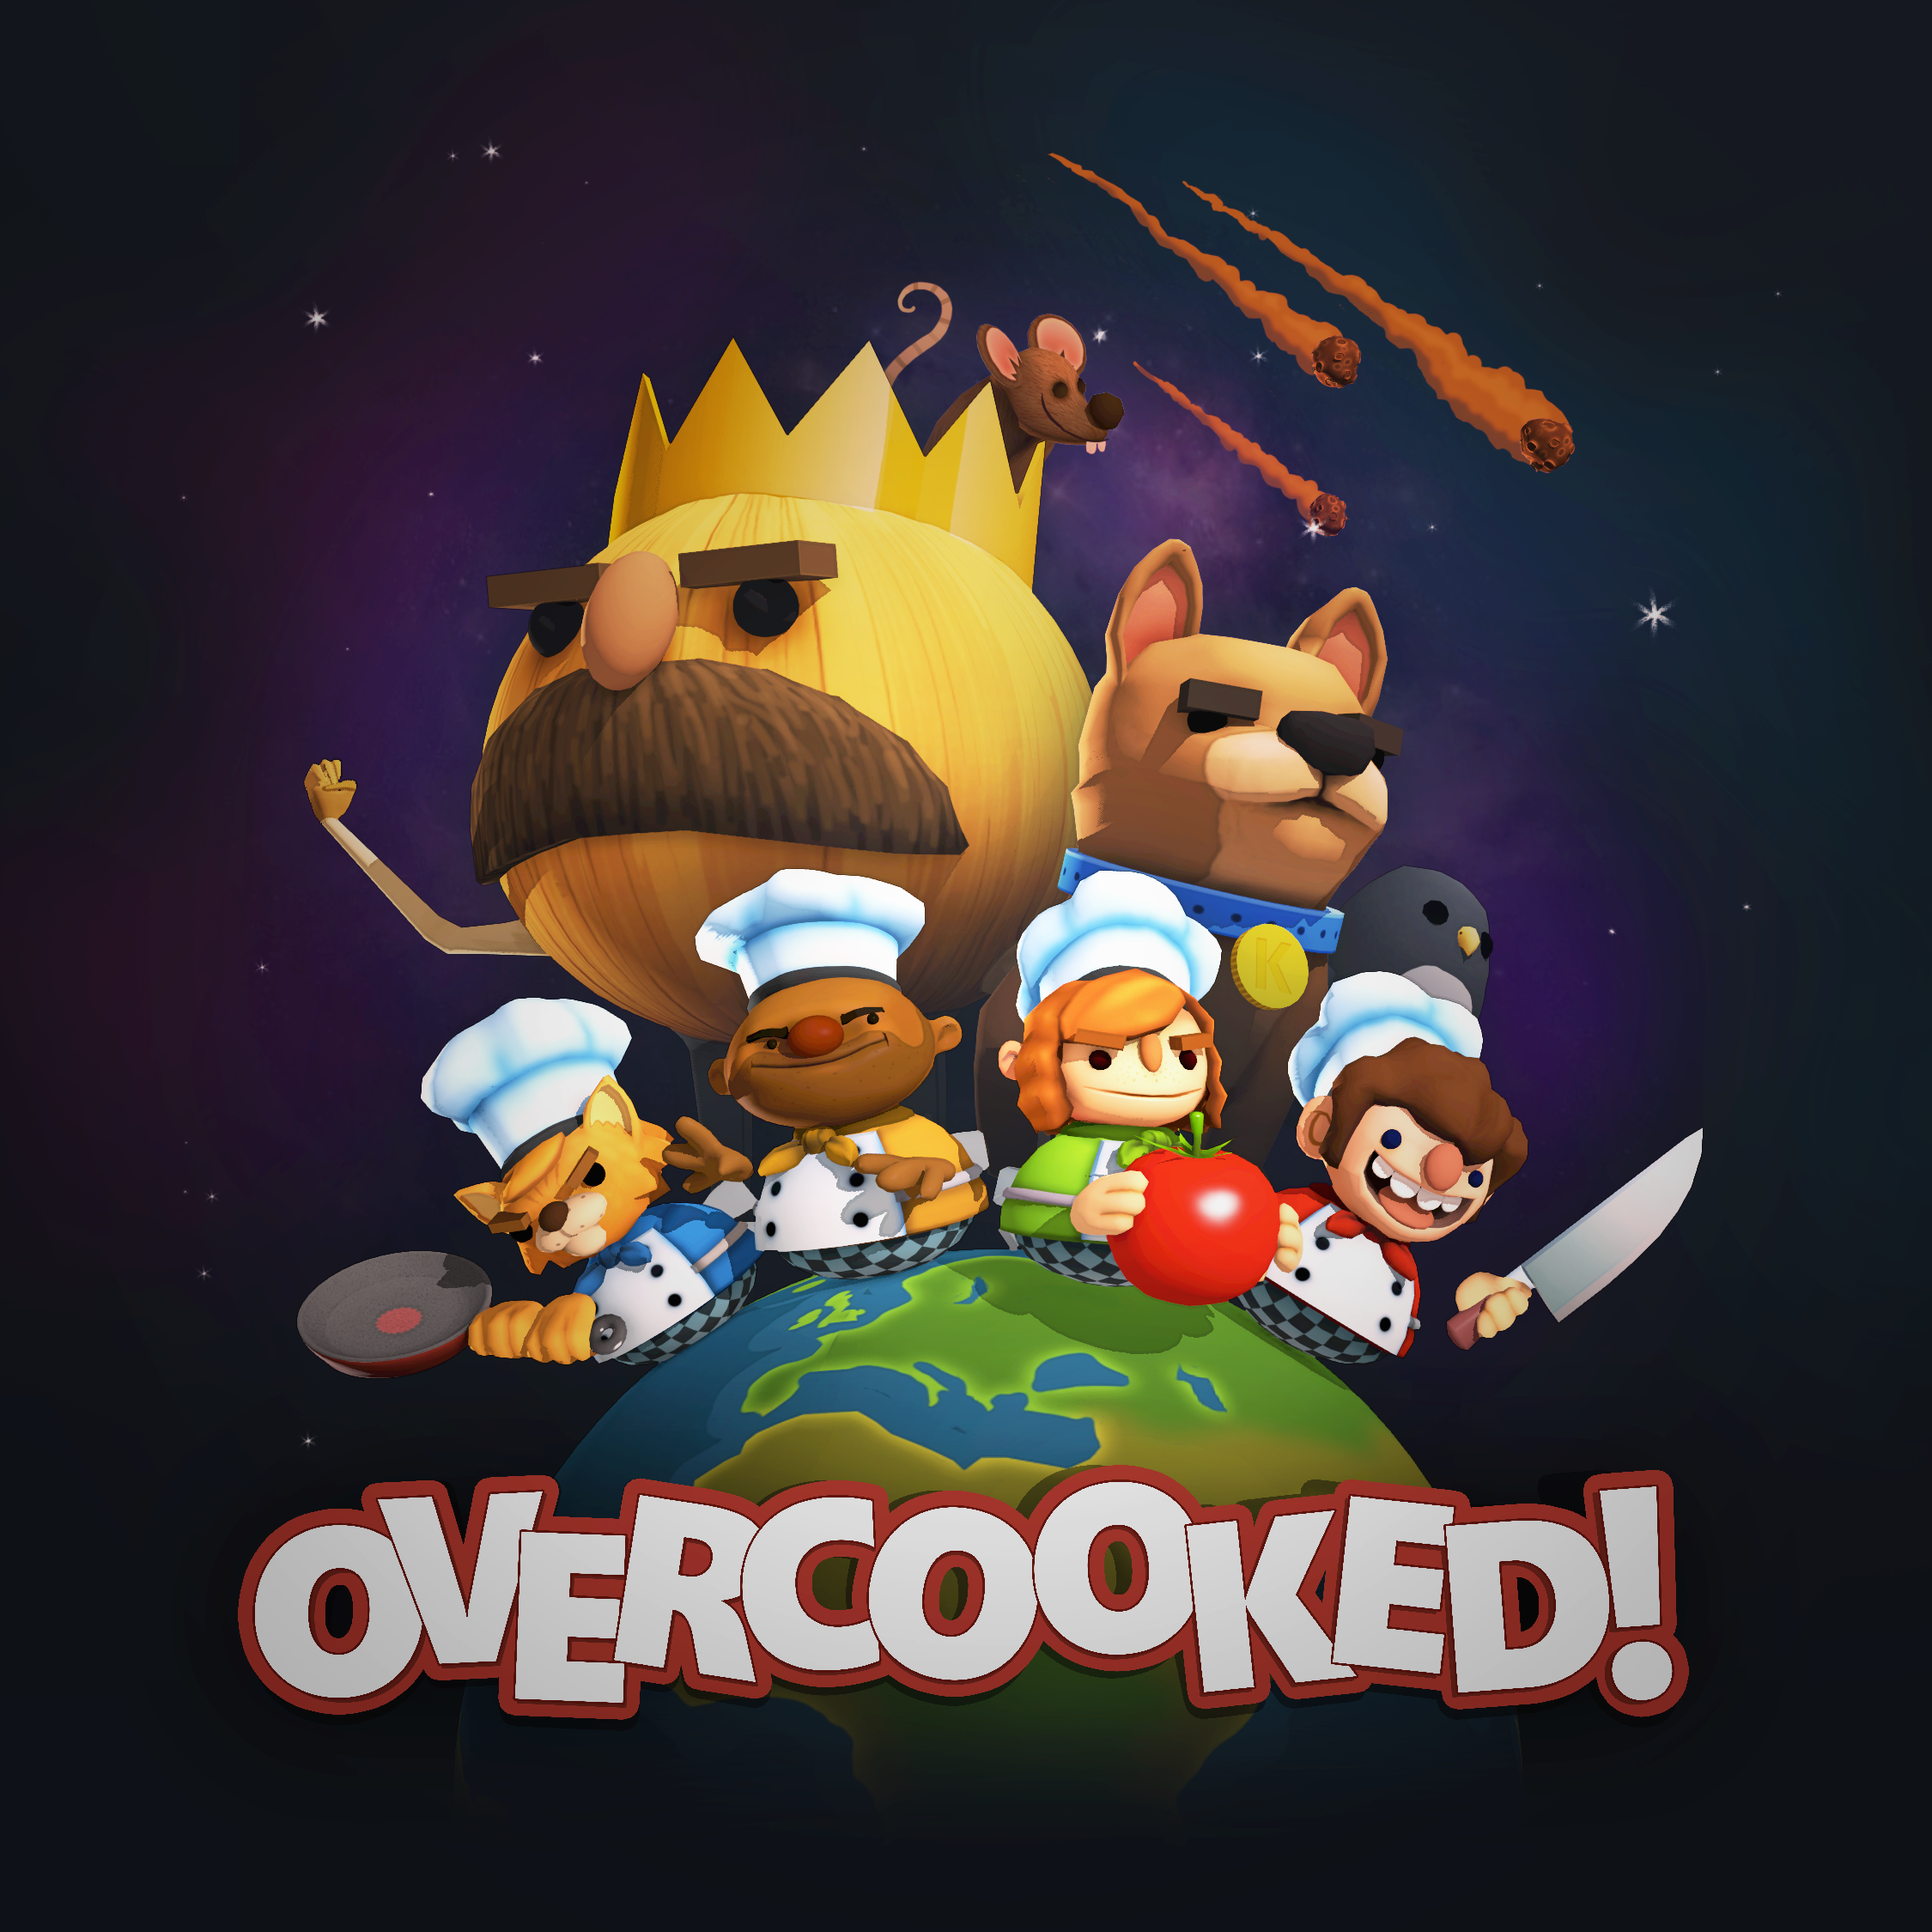 Unofficial subreddit of Overcooked! by Ghost Town Games